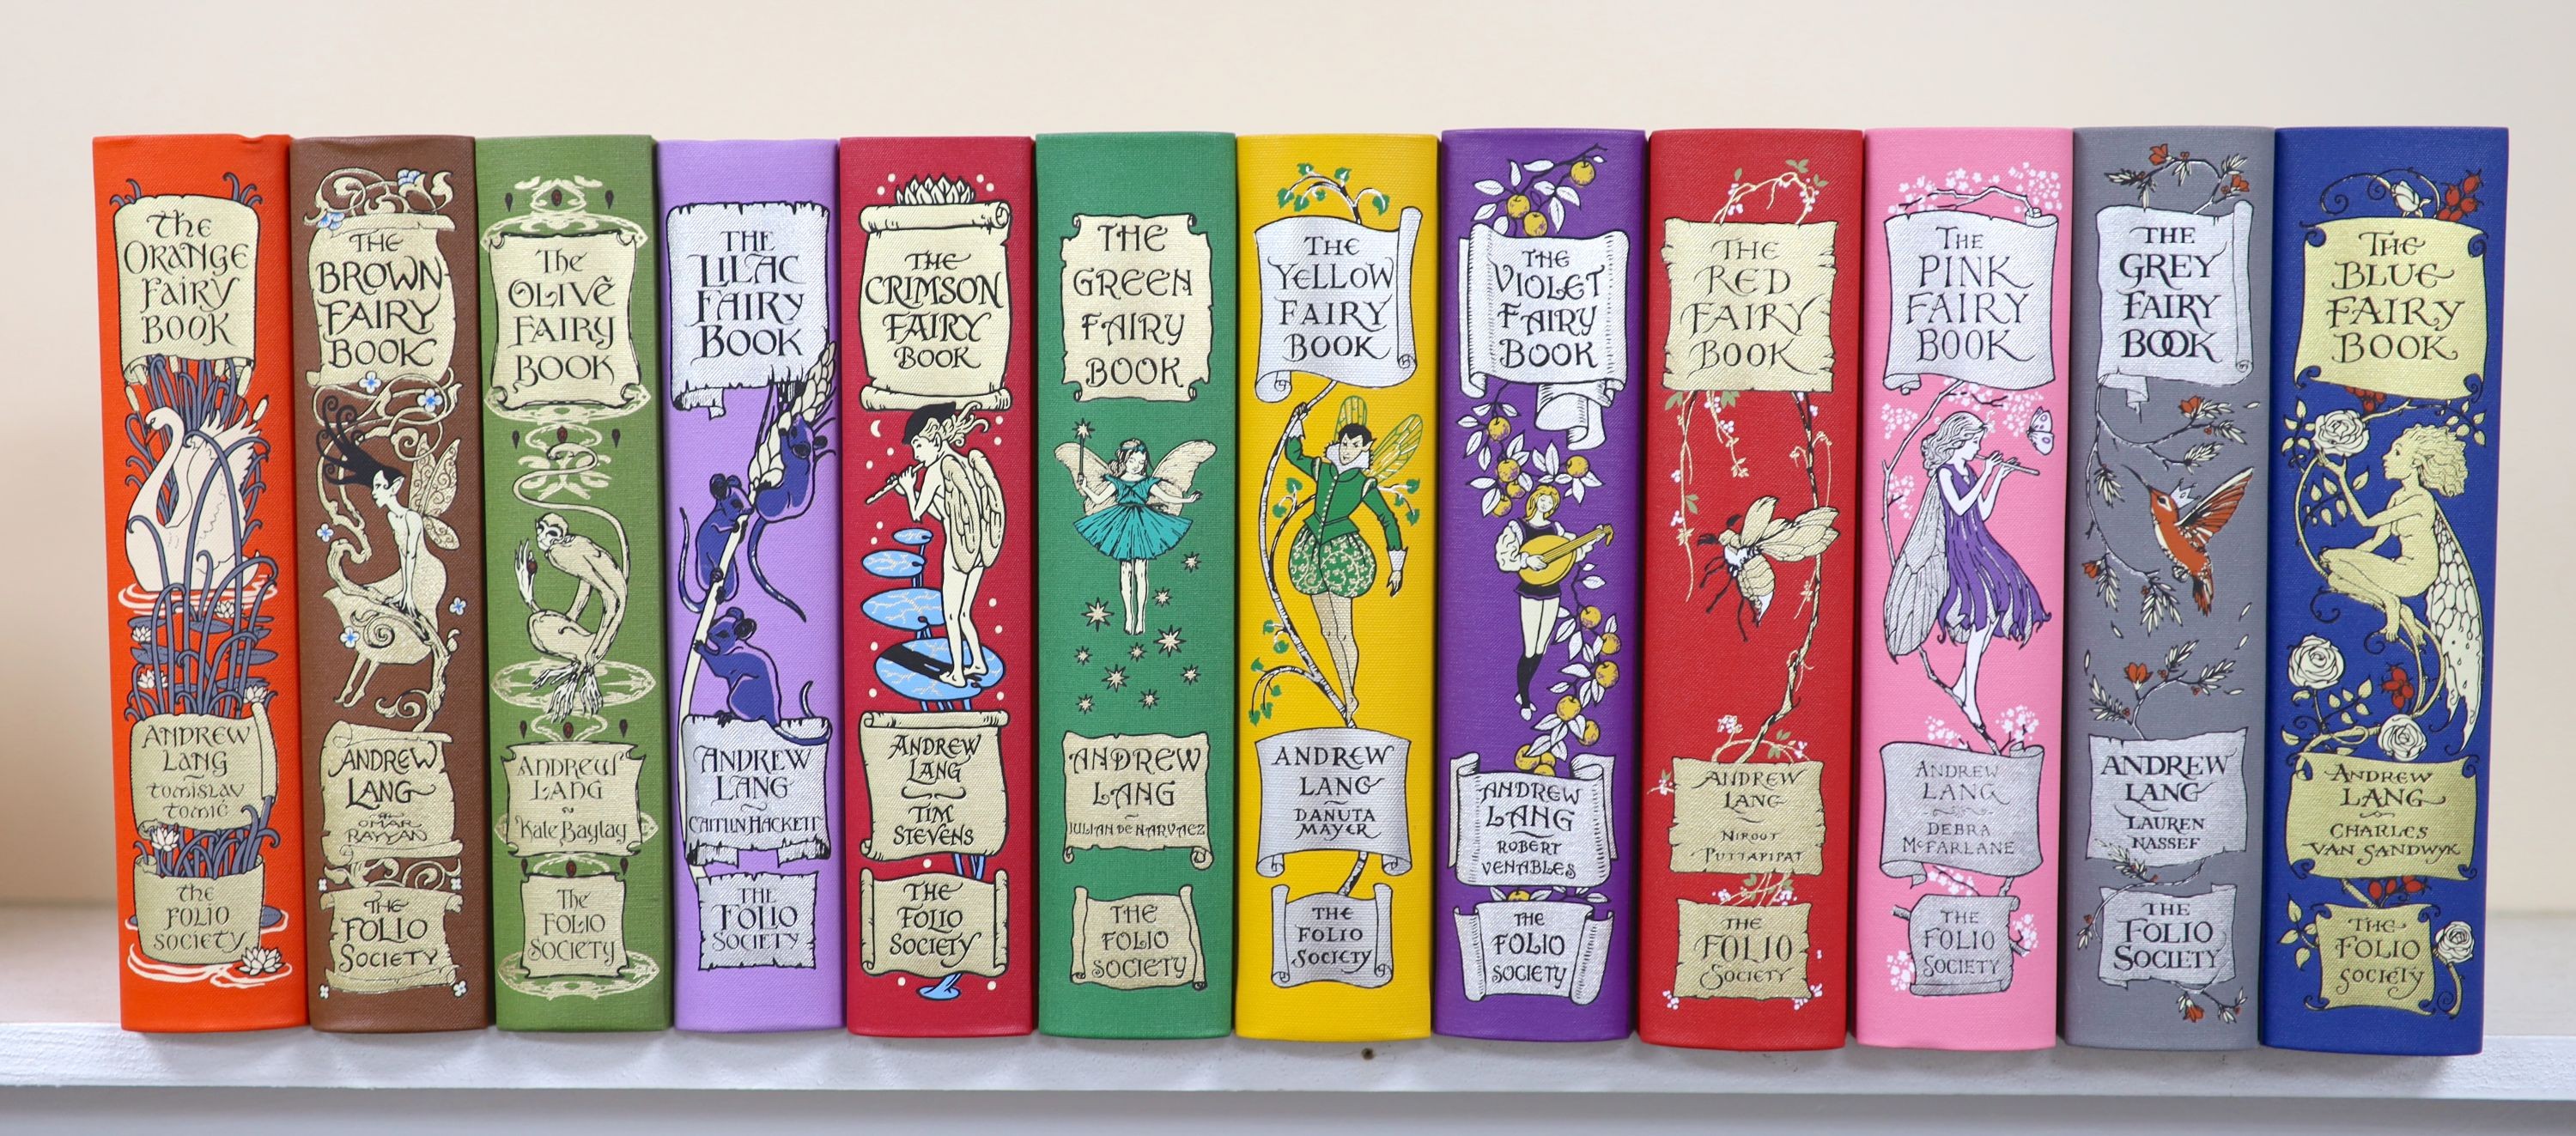 Lang, Andrew (Ed) -The Folio Society Rainbow Fairy Book Collection, Complete set of 12 volumes. (Blue, Red, Green, Yellow, Pink, Grey, Violet, Crimson, Brown, Orange, Olive, Lilac), bound in buckram and blocked in 4 colo